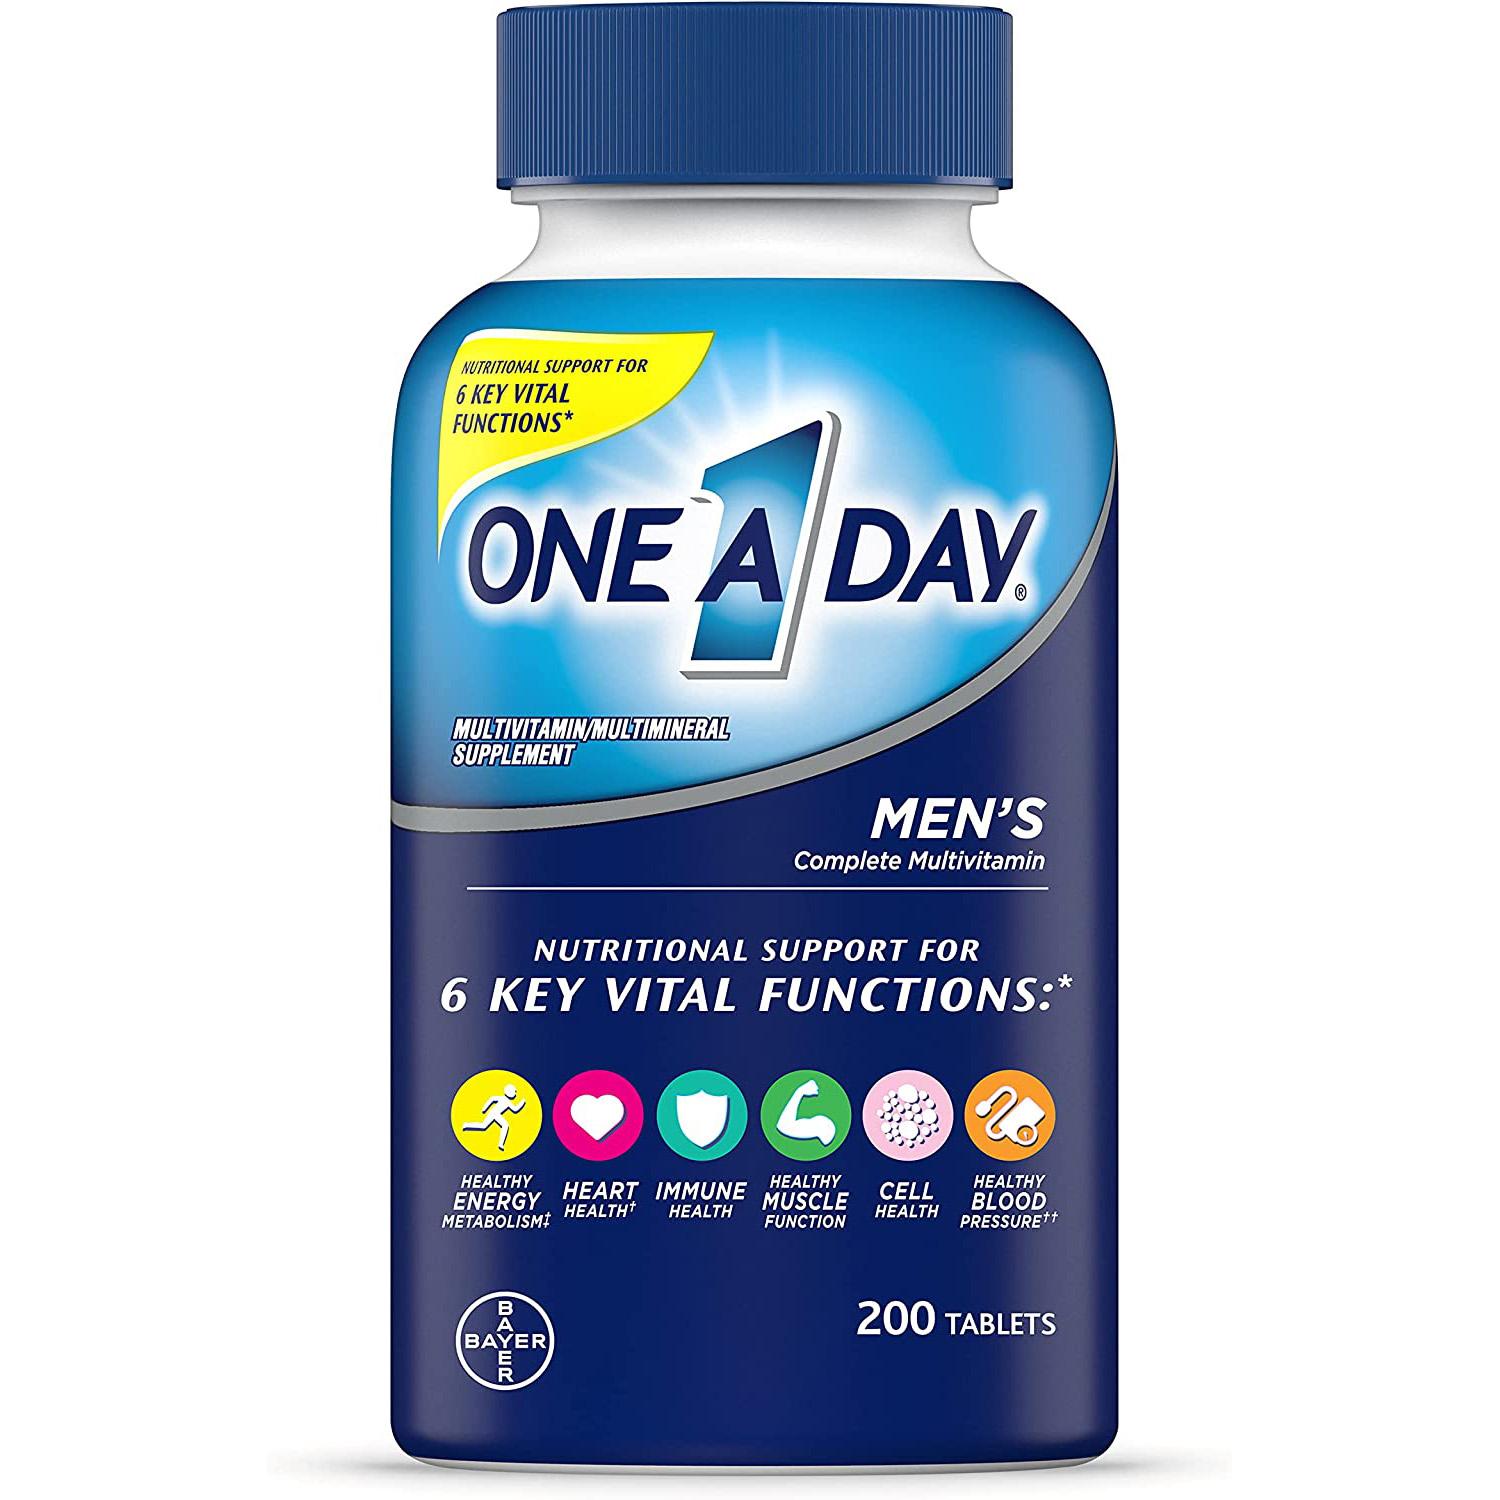 One A Day Complete Multivitamin Supplement for $11.37 Shipped